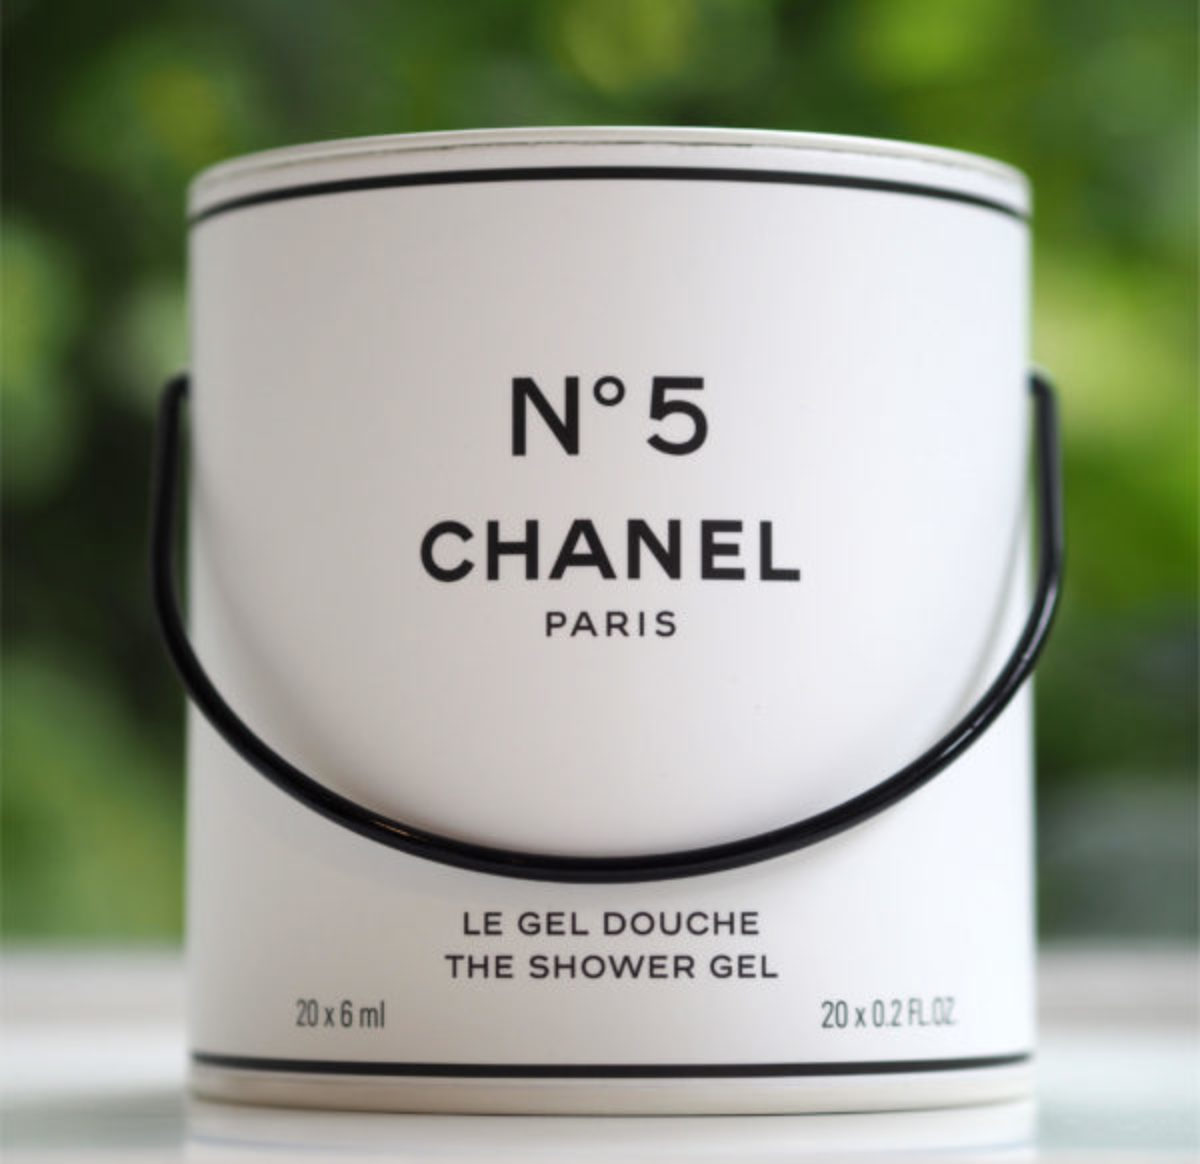 Chanel continues the celebration of N°5 with Chanel Factory 5